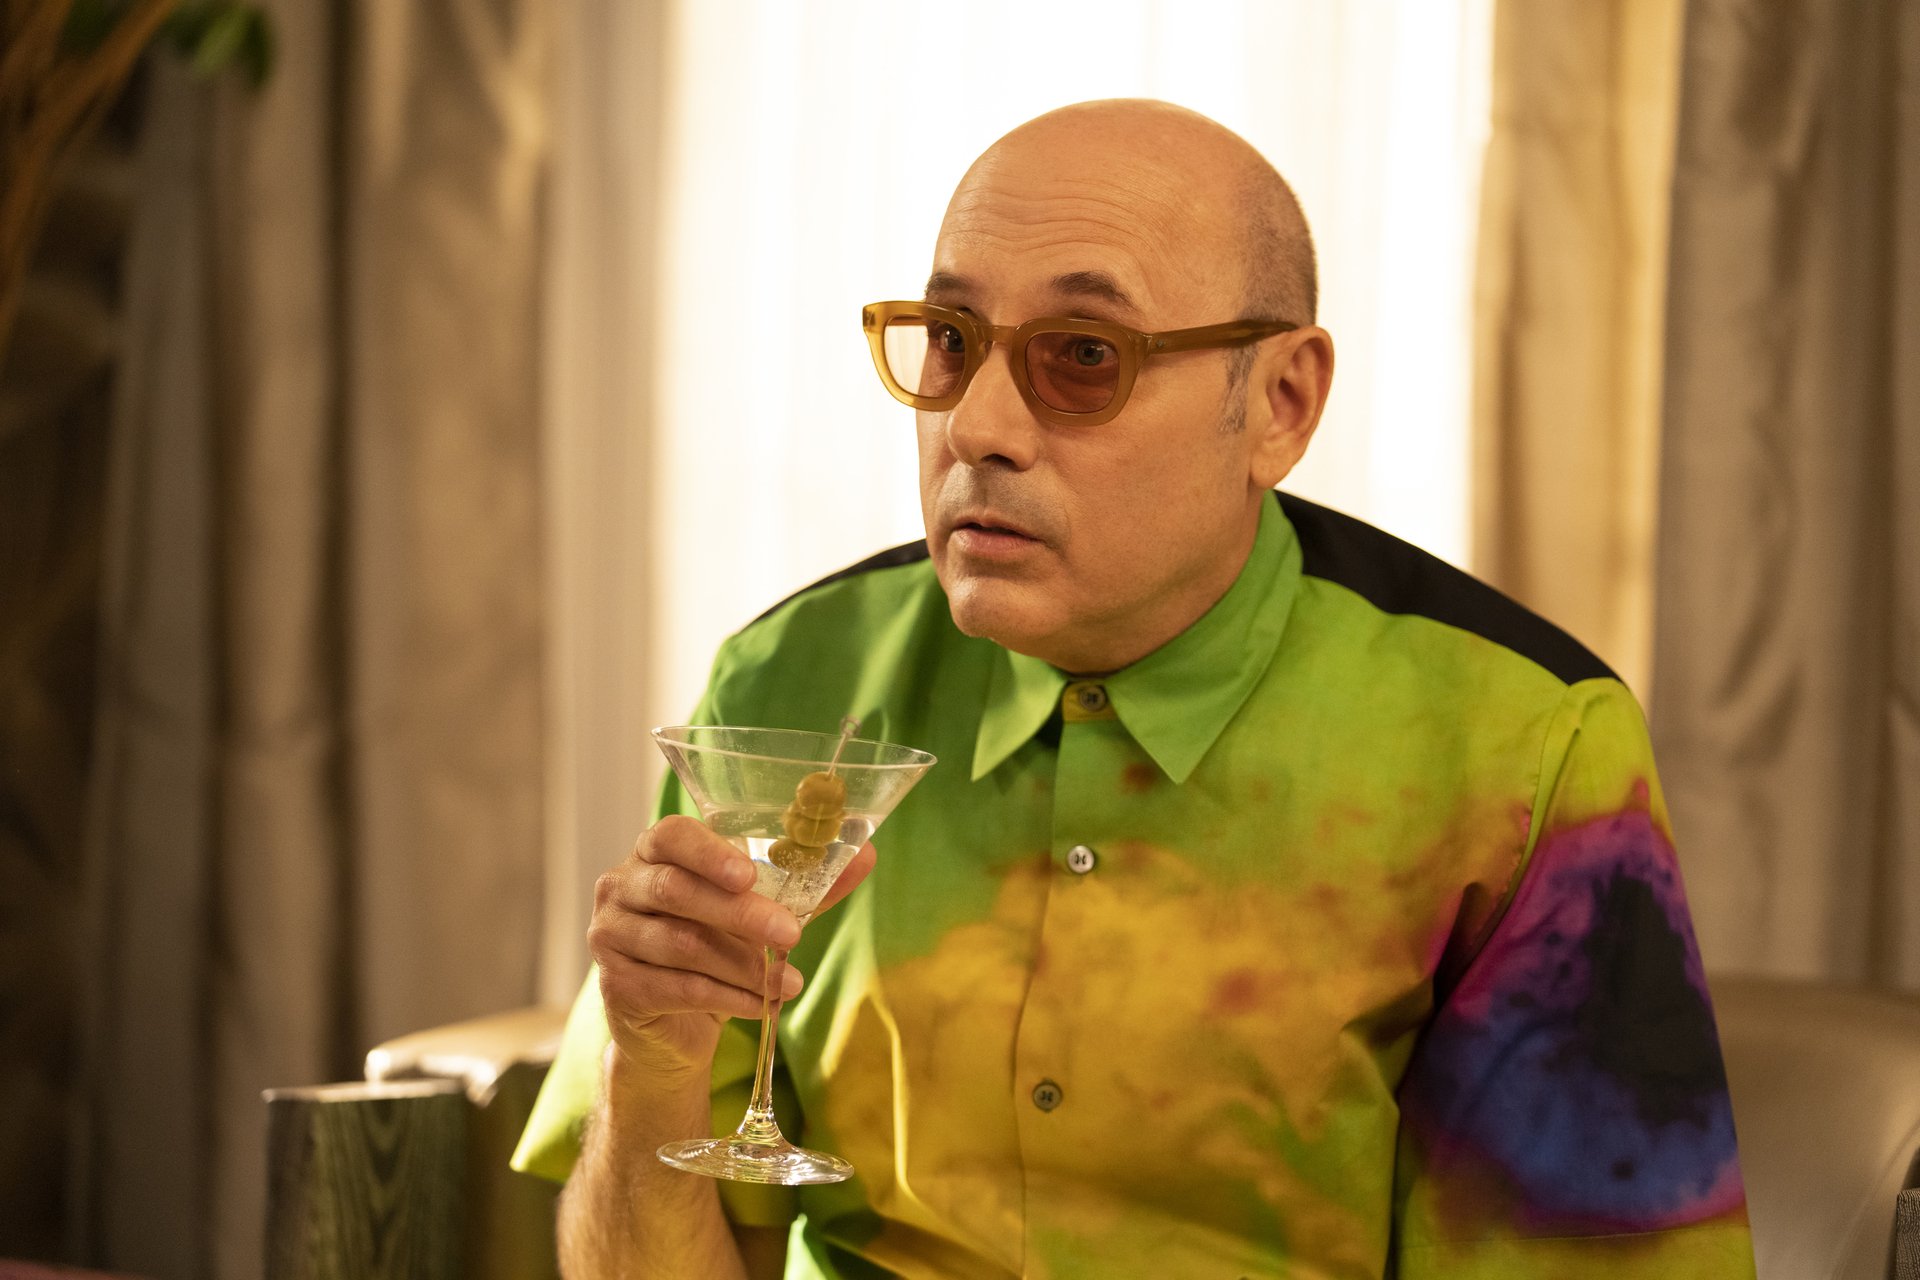 Willie Garson appears as Stanford Blatch in Carrie Bradshaw's apartment during an episode of 'And Just Like That...'